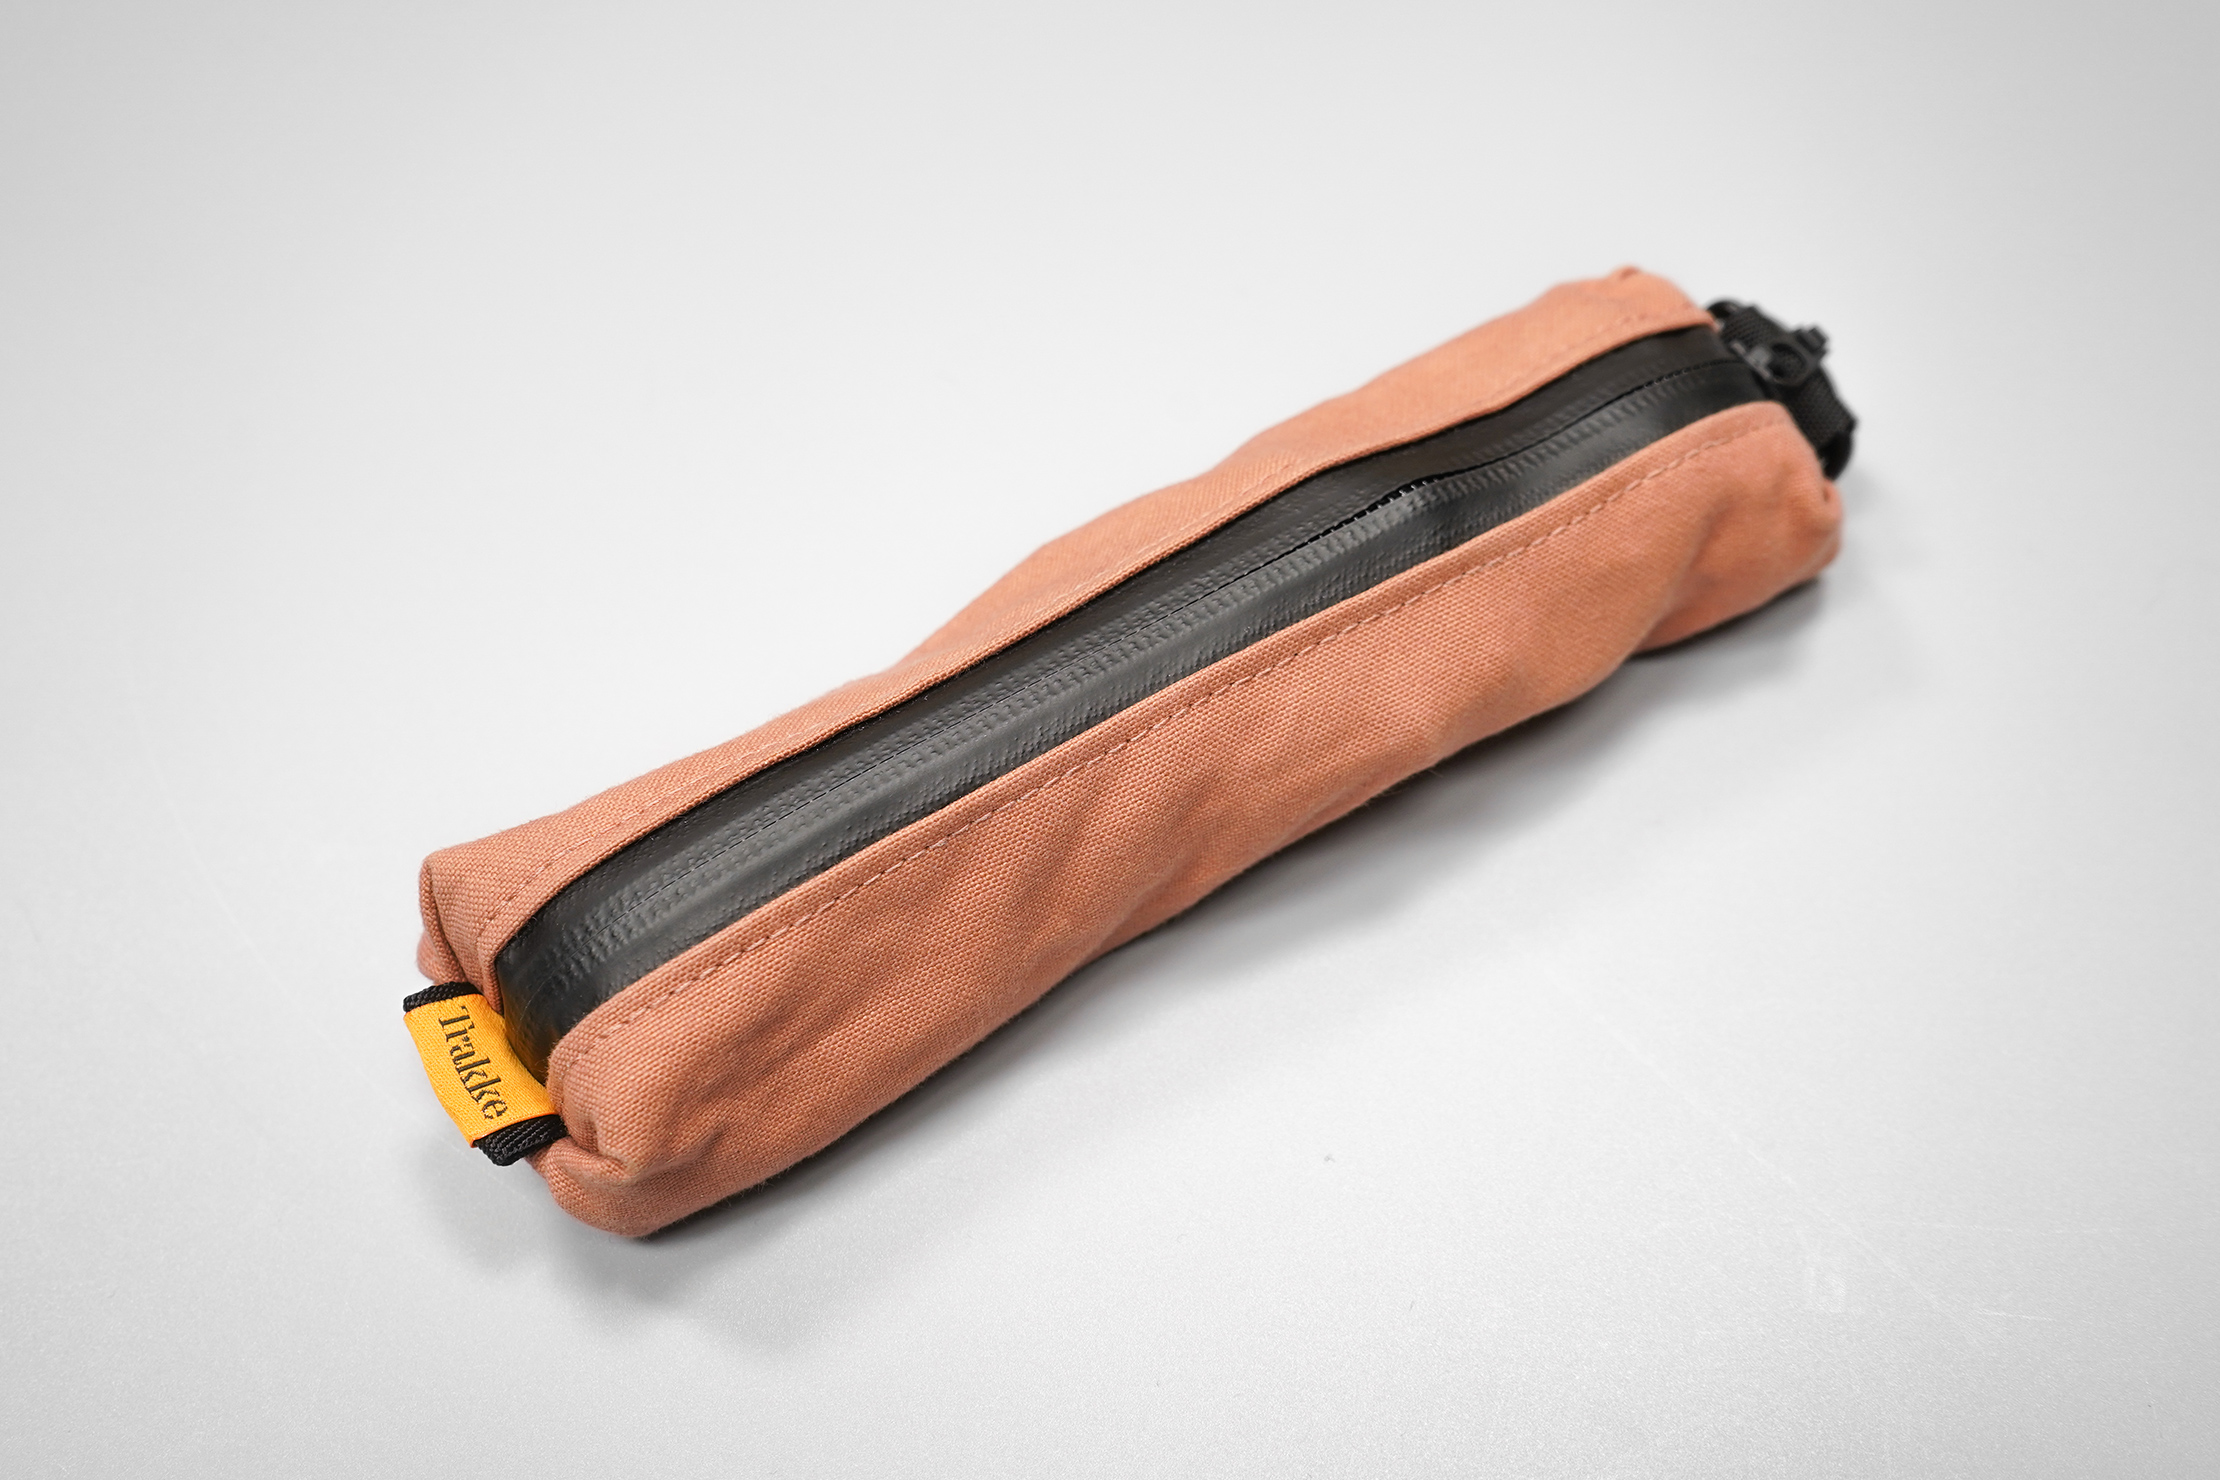 Trakke Pencil Case | A subdued aesthetic does not mean an absence of taste